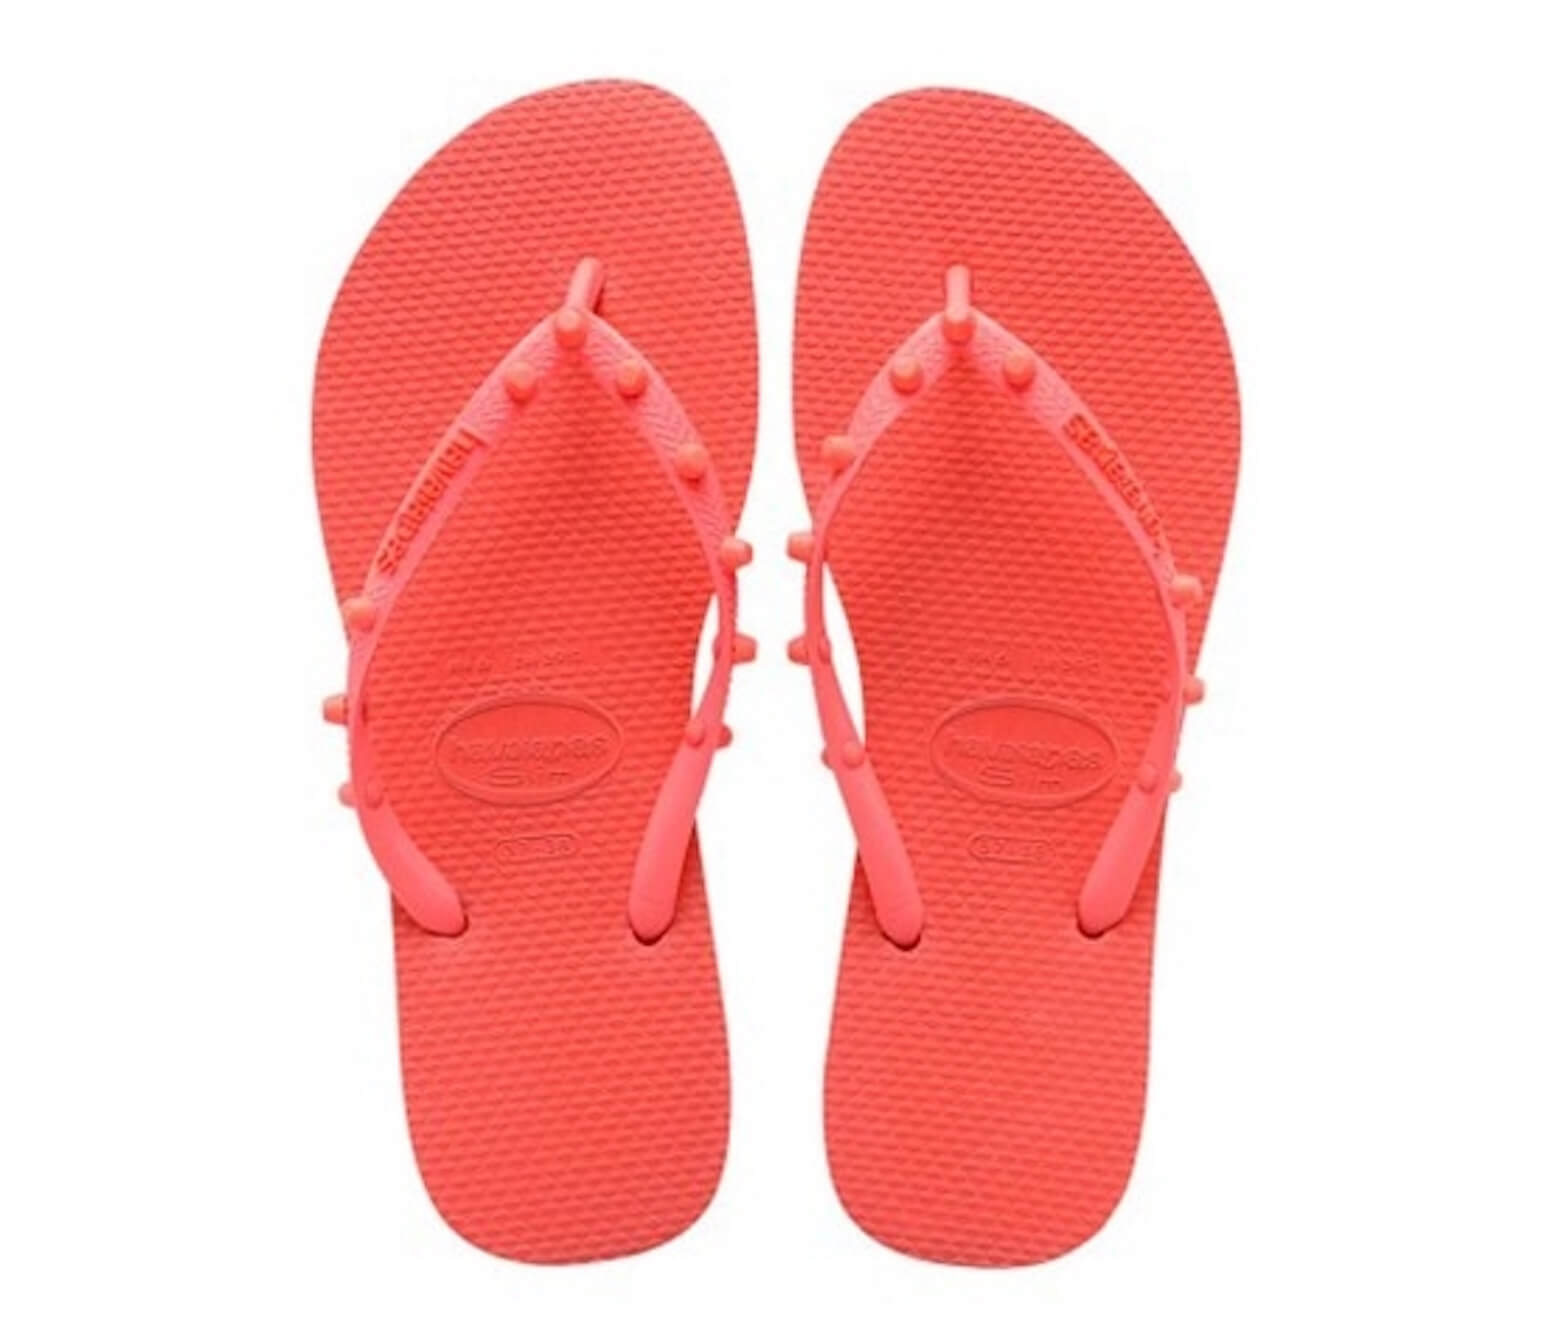 Zehentrenner -  Havaianas Slim Candy Coral new Havaianas. Sommer Schuhe Sandale